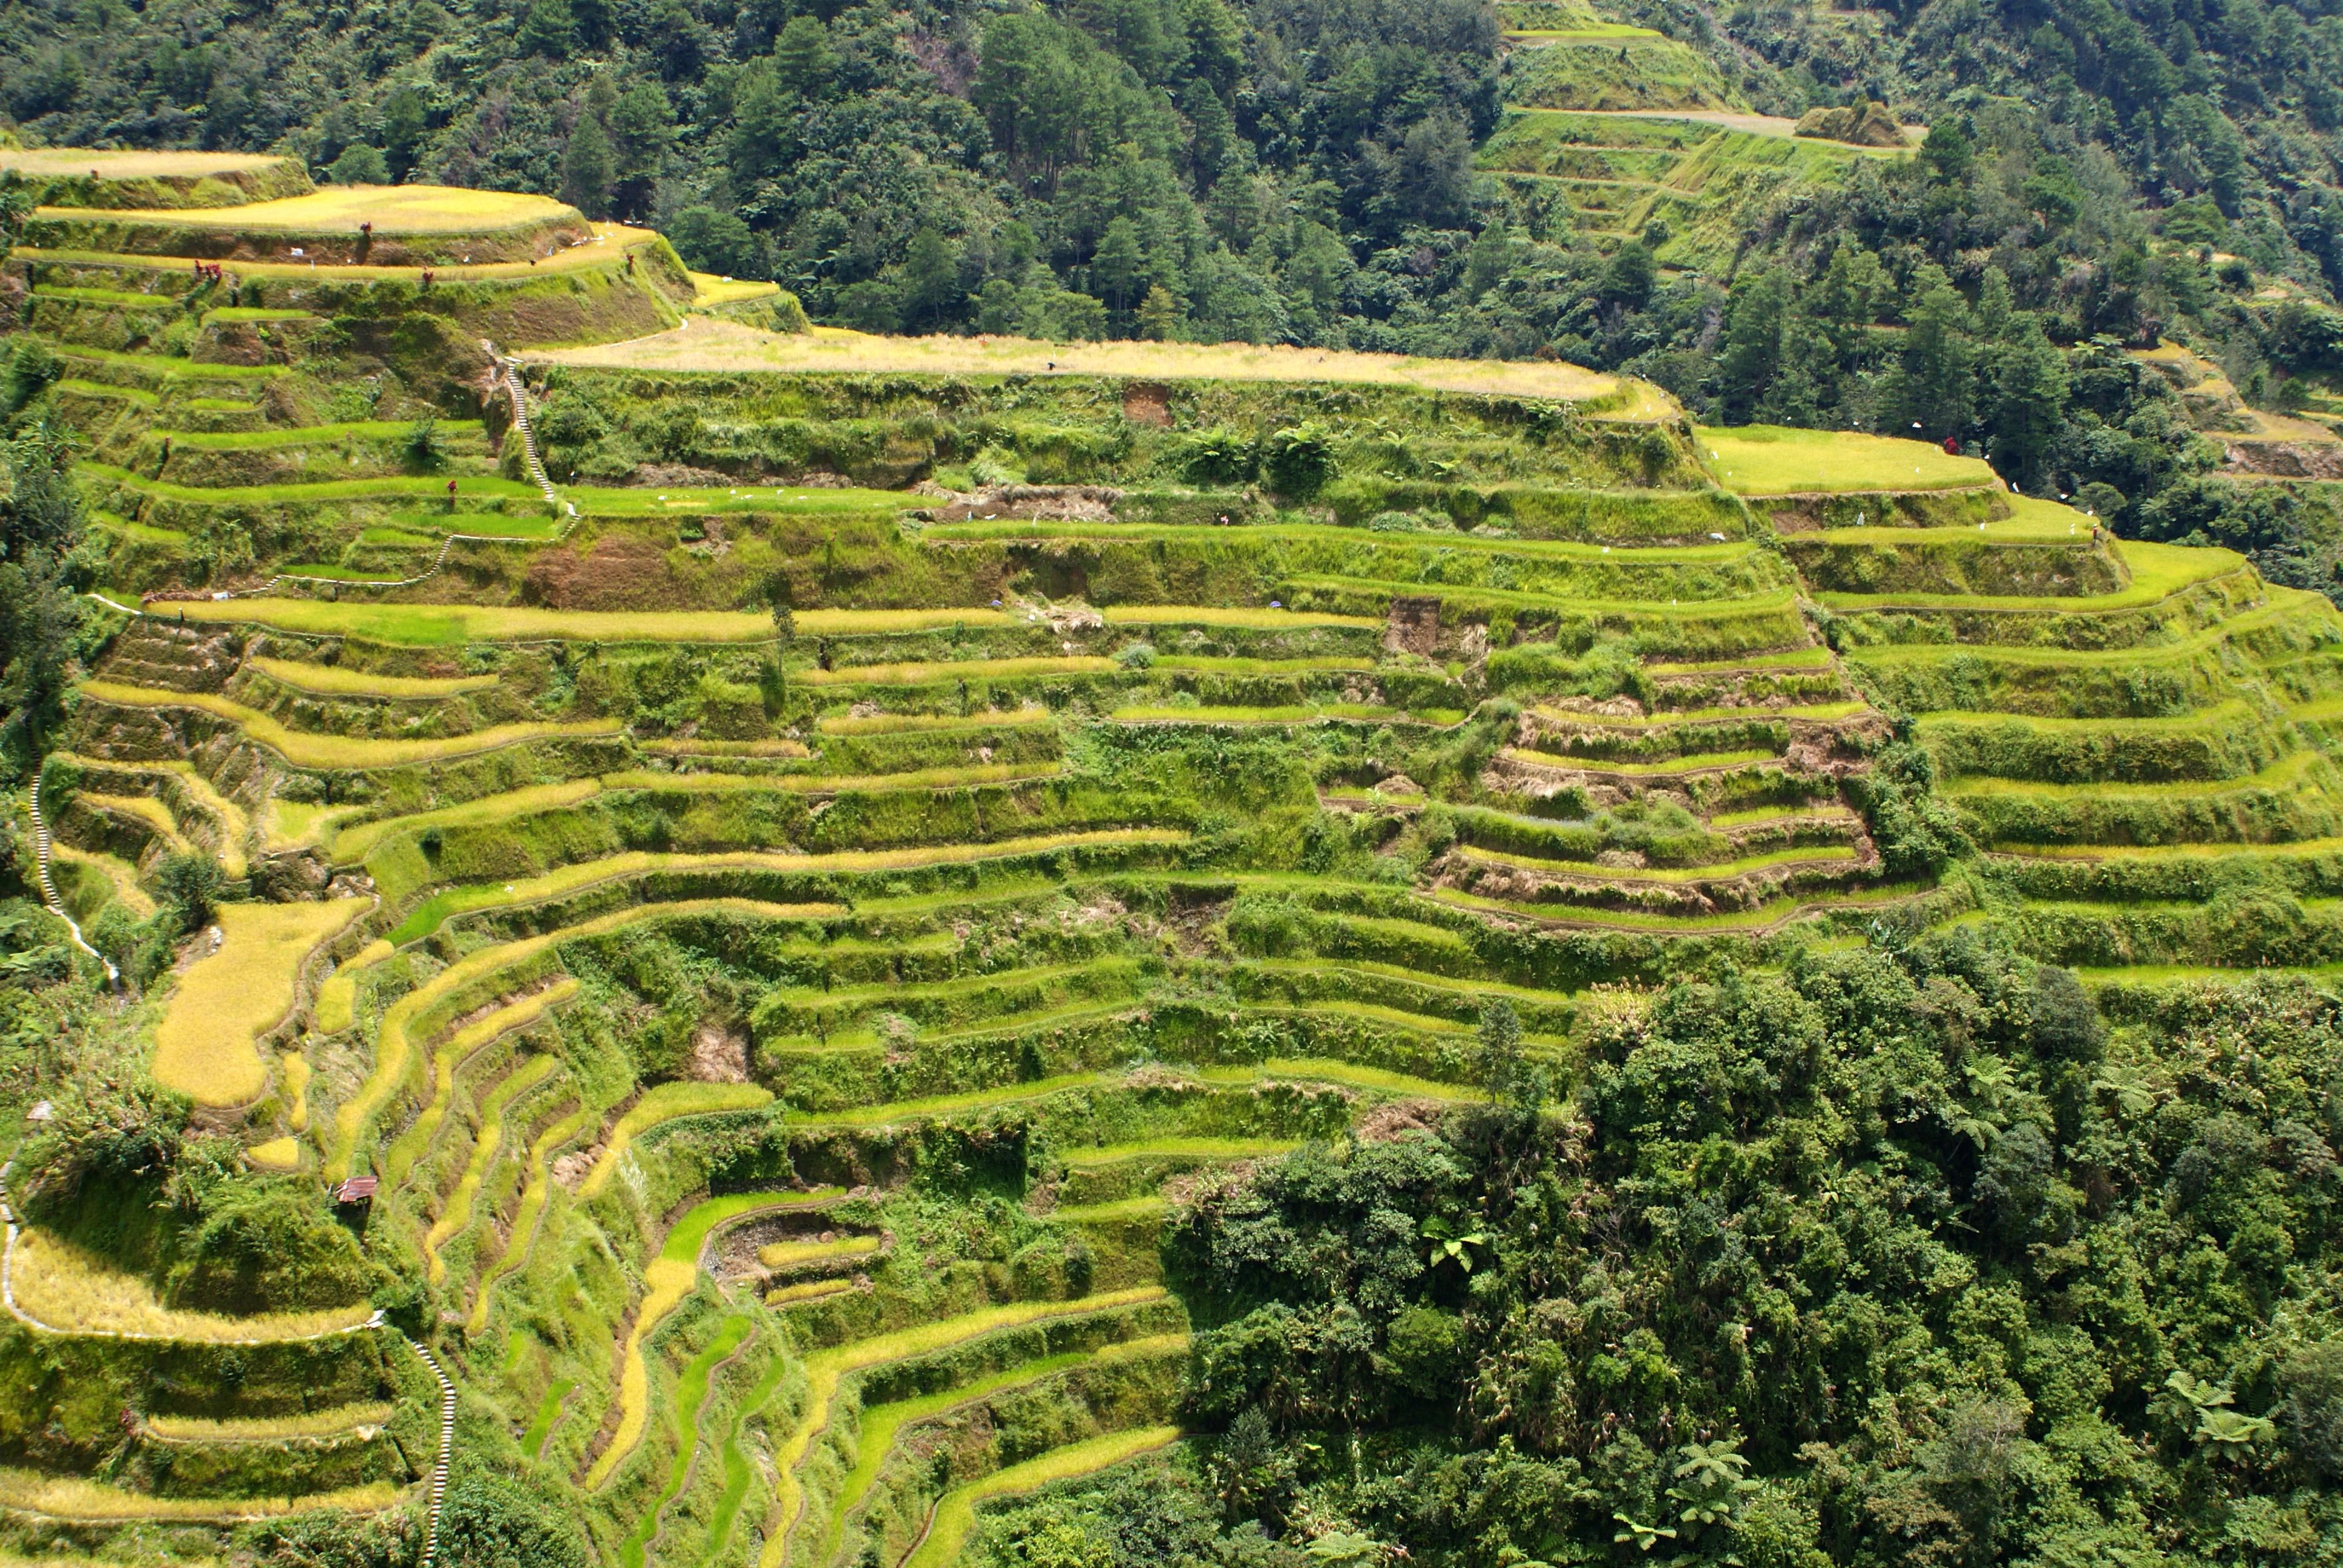 Banaue Rice Terraces, Philippines - Map, Facts, Location, Information